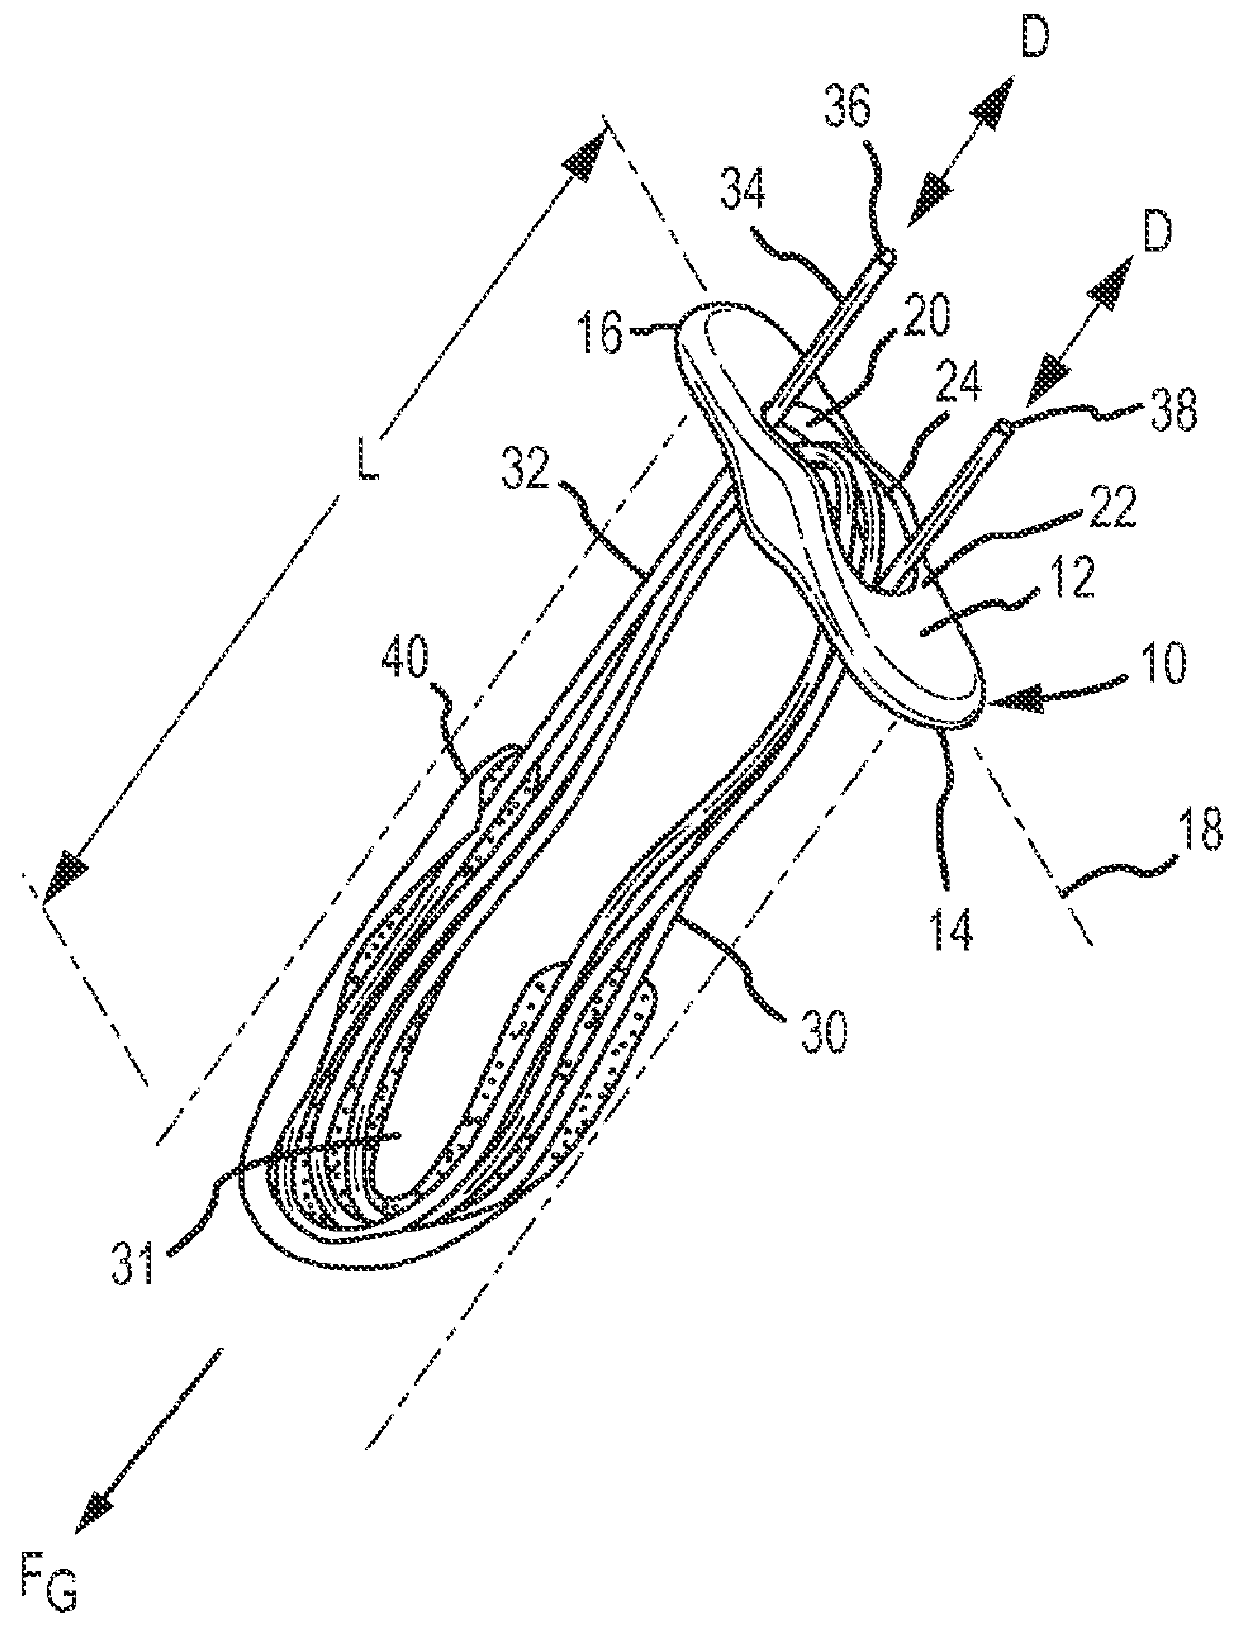 Suspensory graft fixation with adjustable loop length